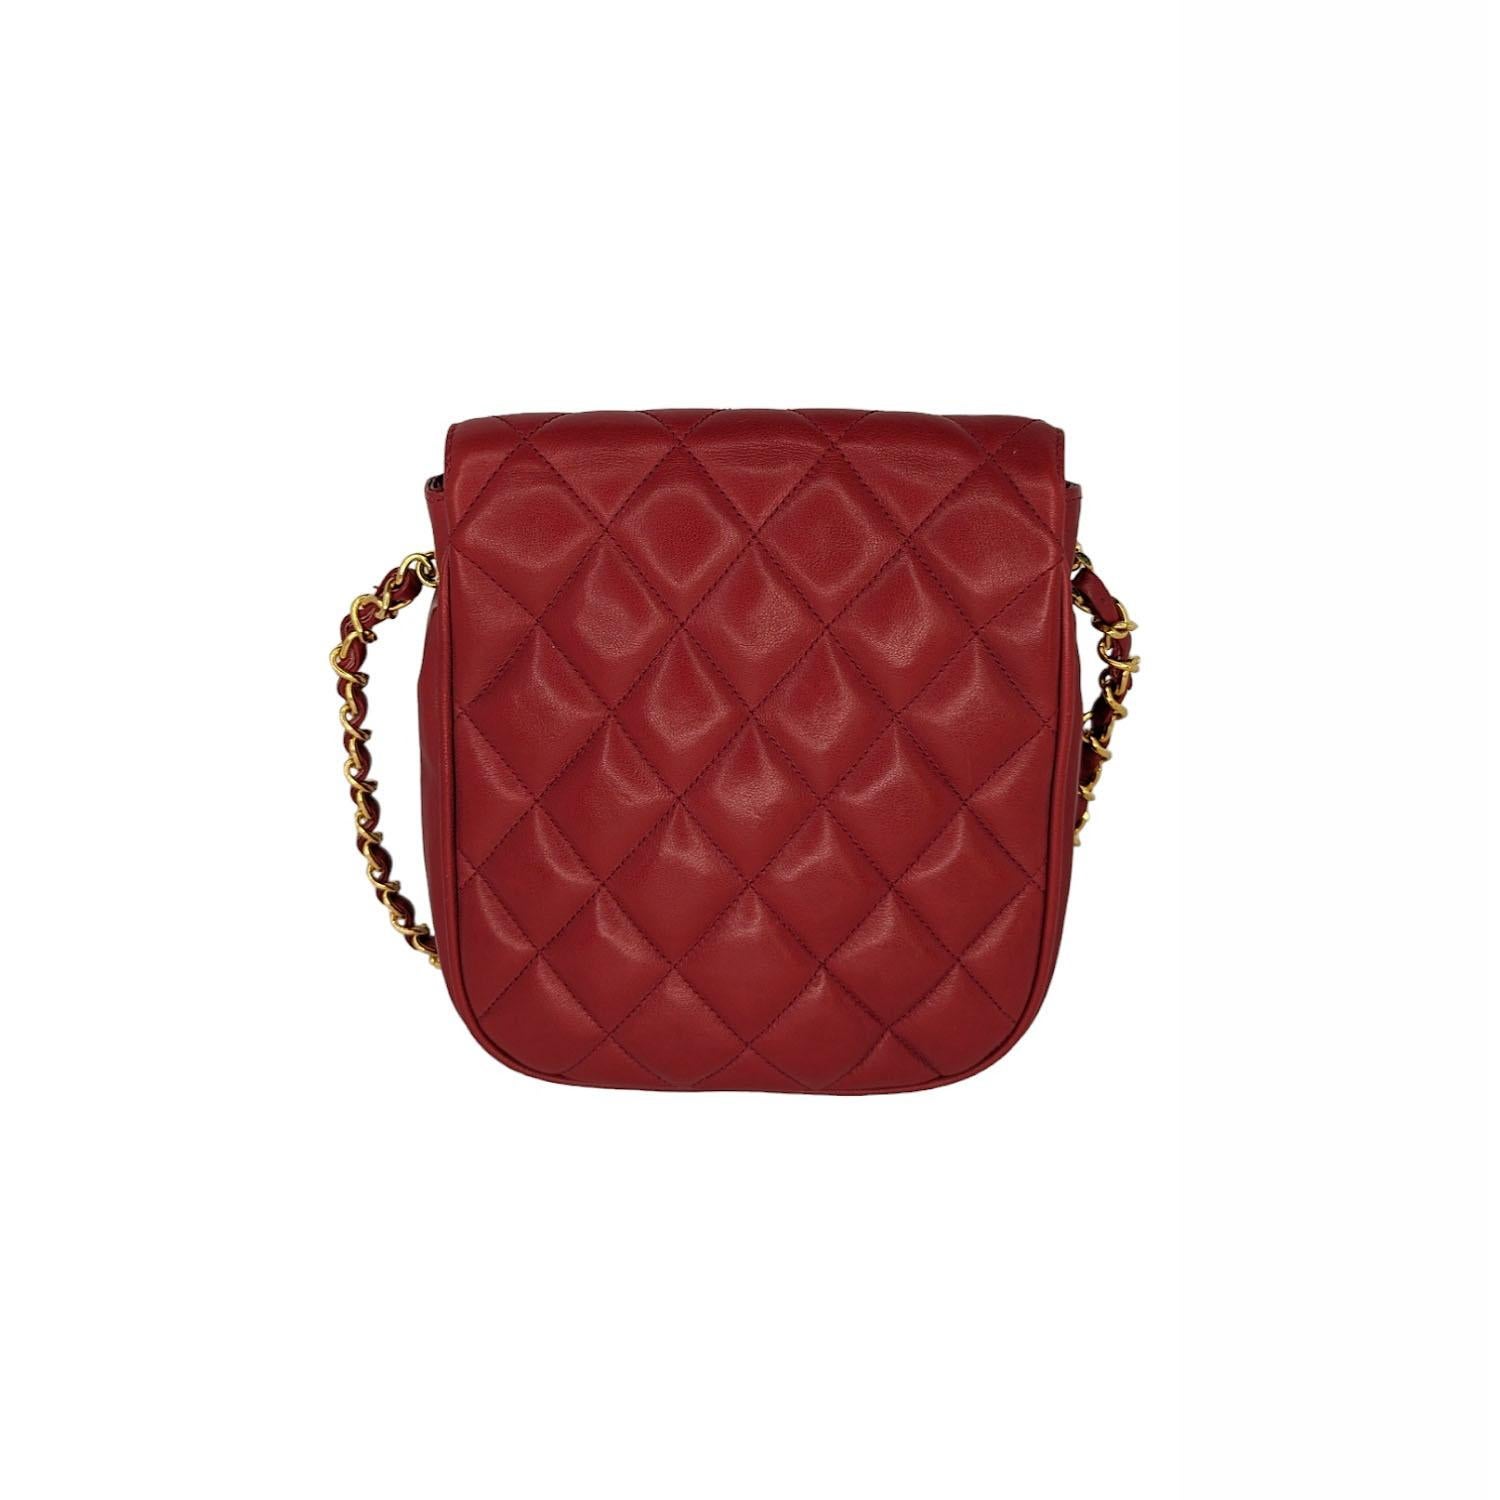 Chanel 90s Red Lambskin Quilted Mini CC Flap Messenger In Good Condition For Sale In Scottsdale, AZ